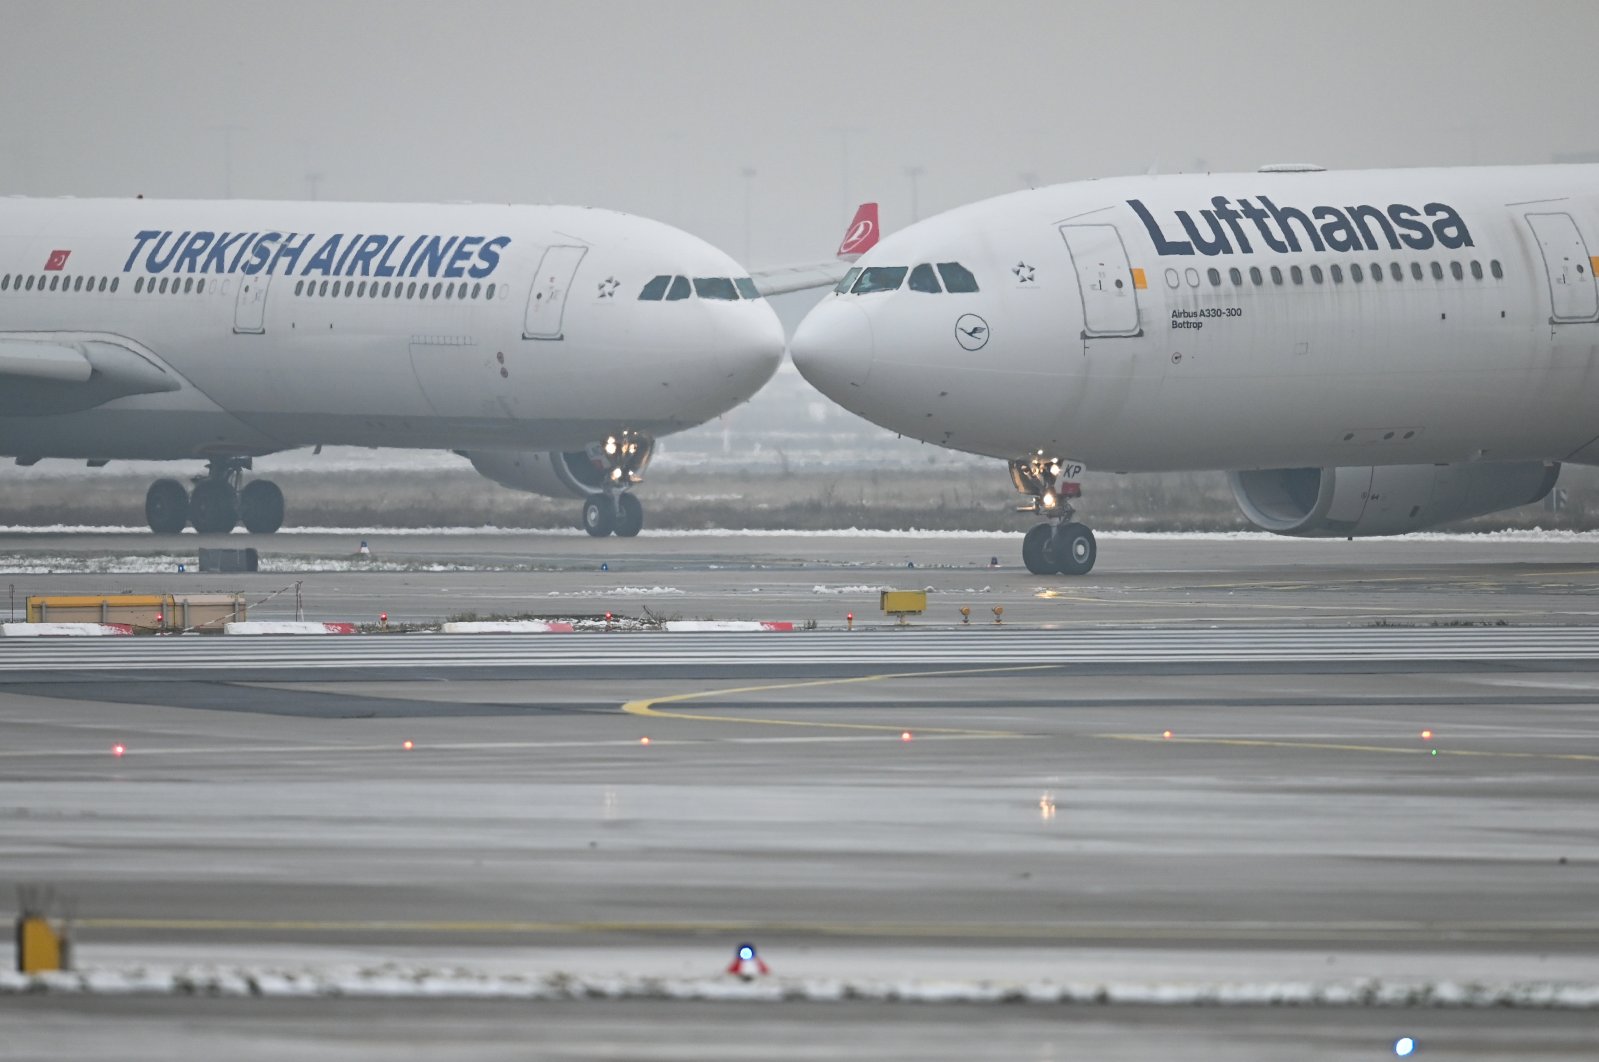 Airbus planes of Turkish Airlines and Lufthansa meet on the runway of Frankfurt Airport, Germany, Dec. 1, 2020. (dpa Photo)